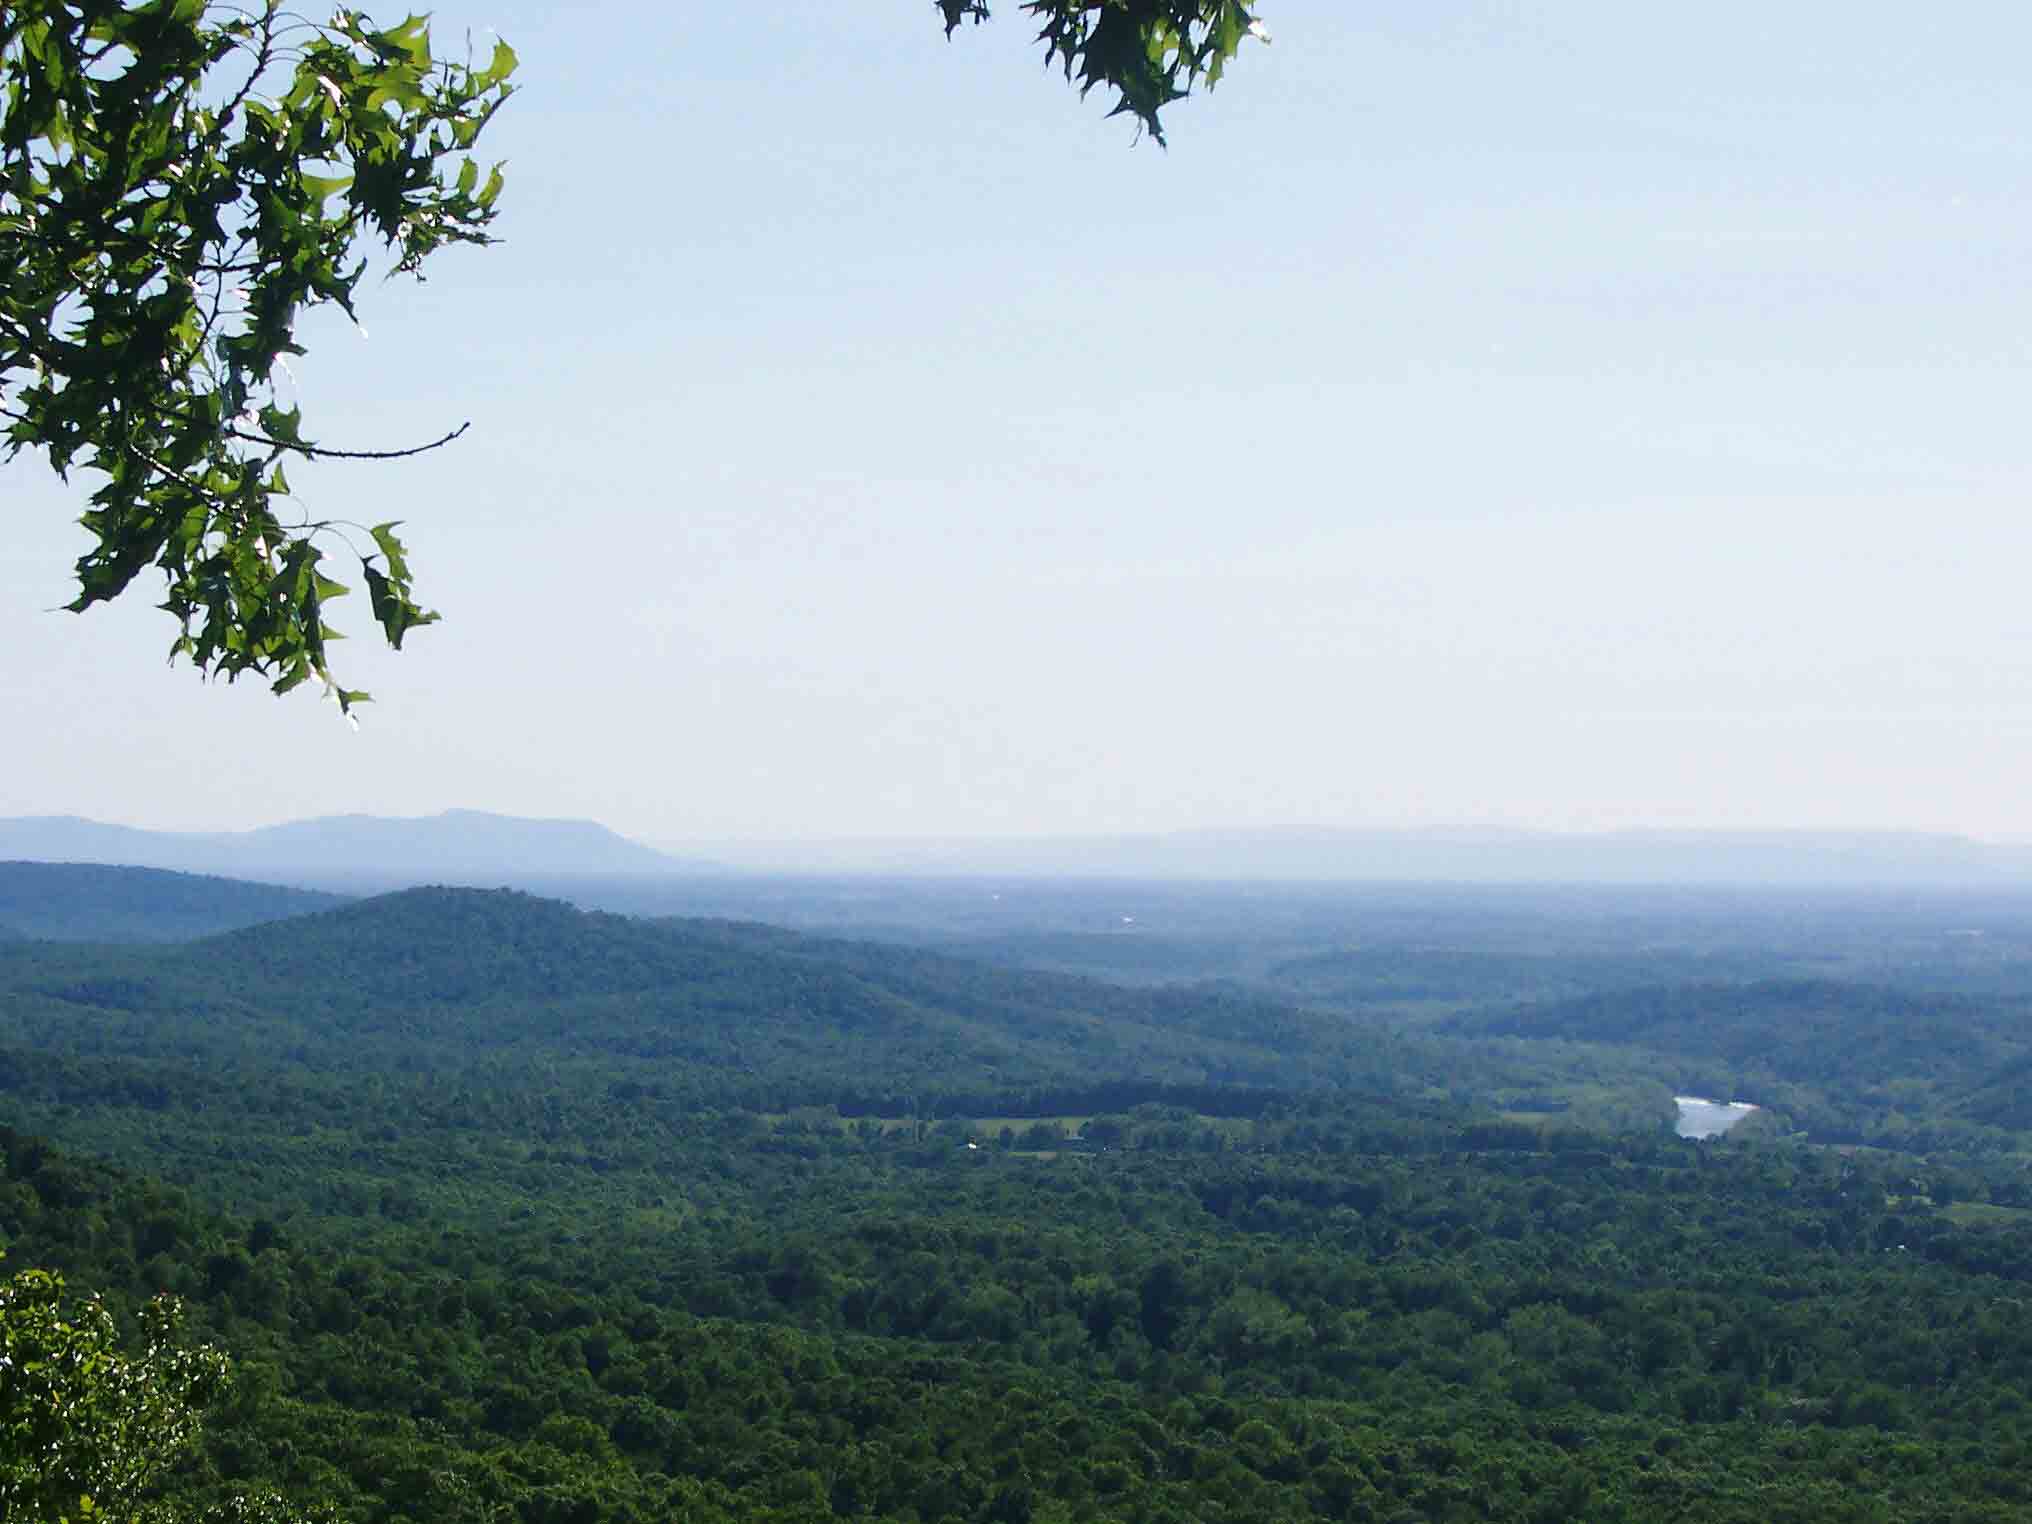 mm 0.6 View southwest from Bears Den Rocks. Shenandoah River visible on right. Massanutten Mountains are in distance. Courtesy dlcul@conncoll.edu